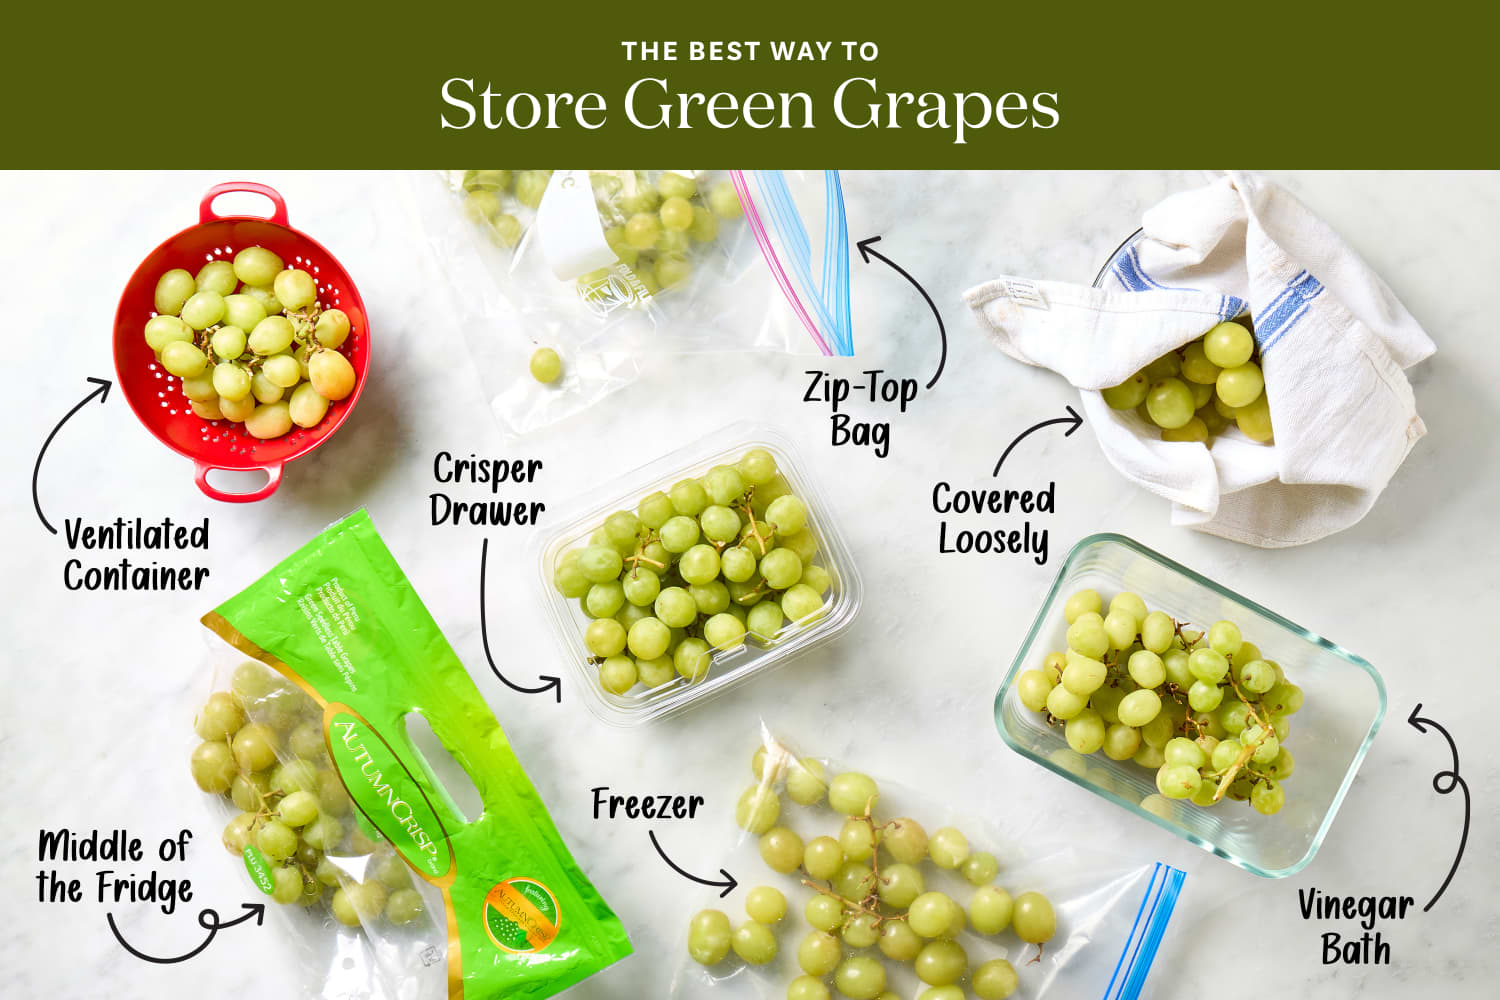 I Tried 7 Ways of Storing Grapes and the Winner Outlasted Them All (and Kinda Shocked Us)